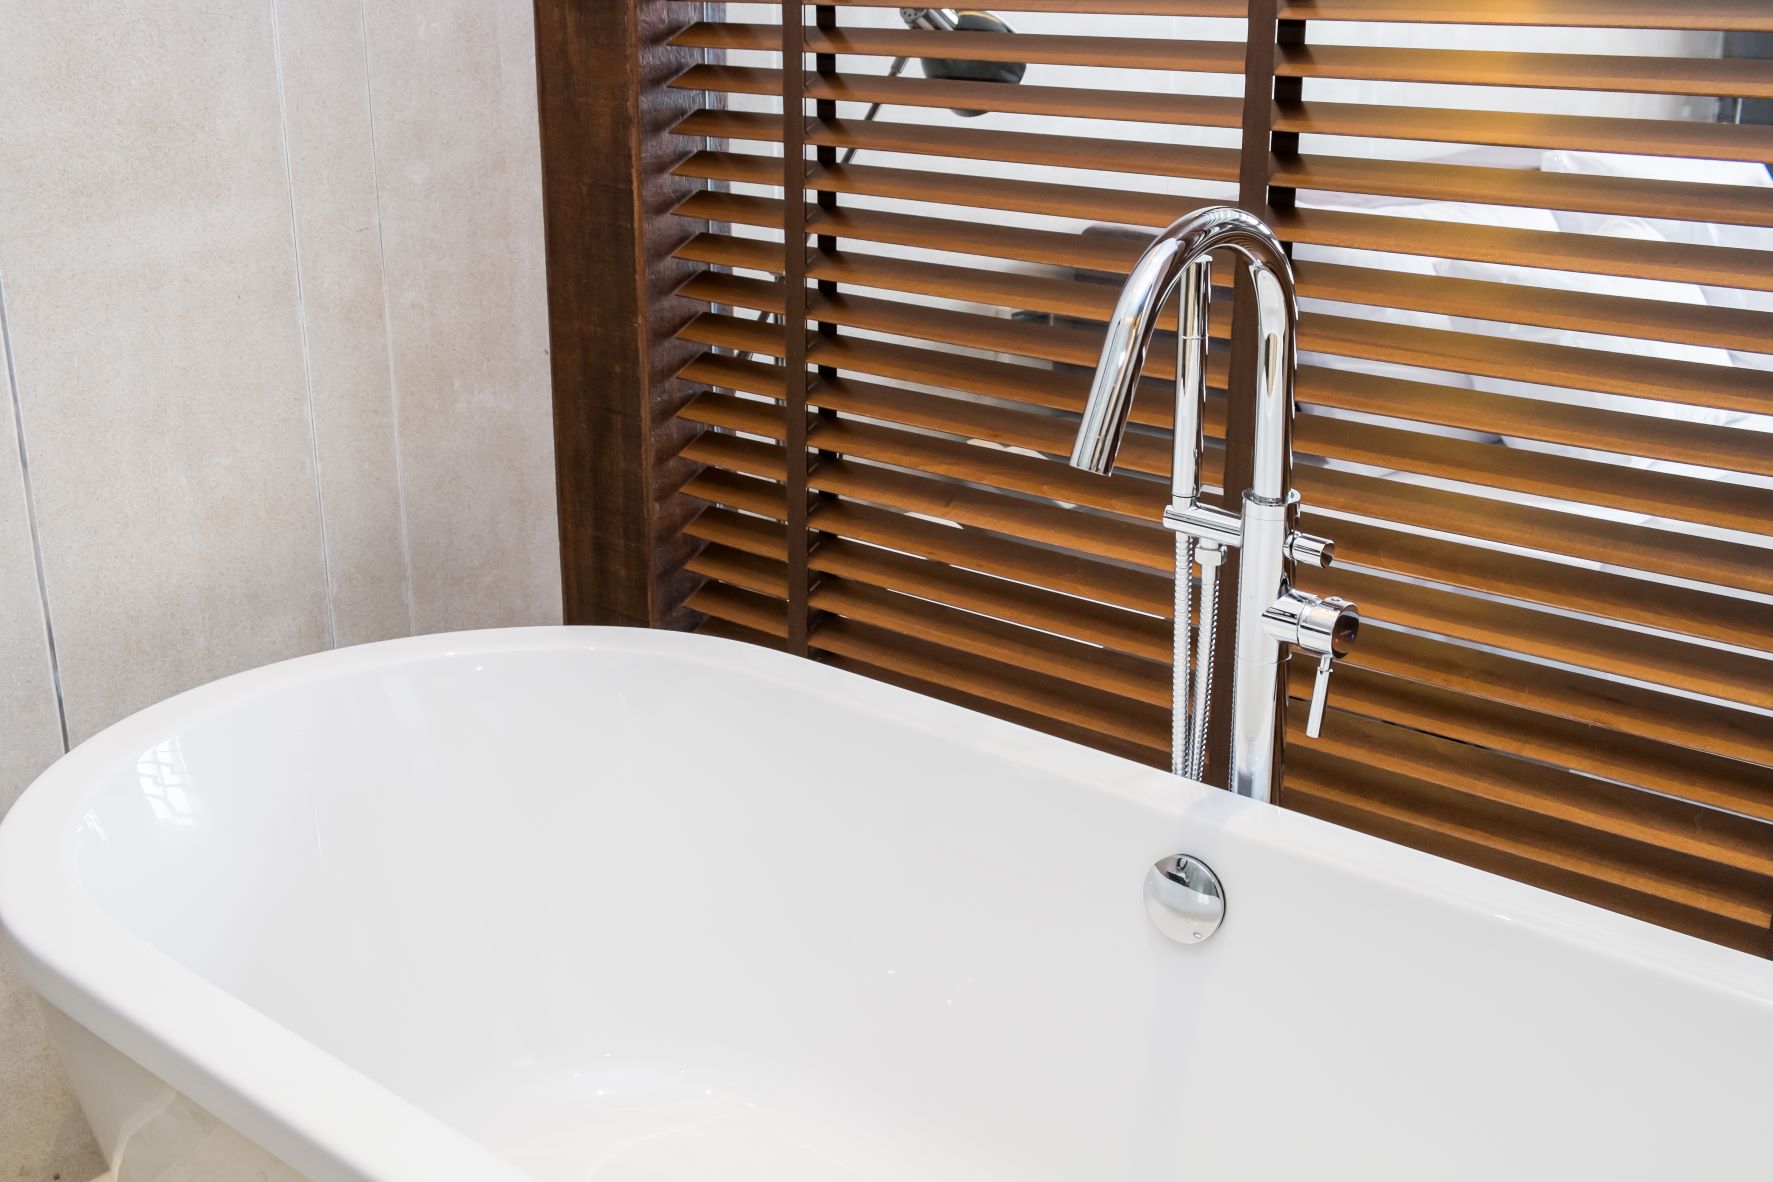 faux wood shutters over a large window by a tub